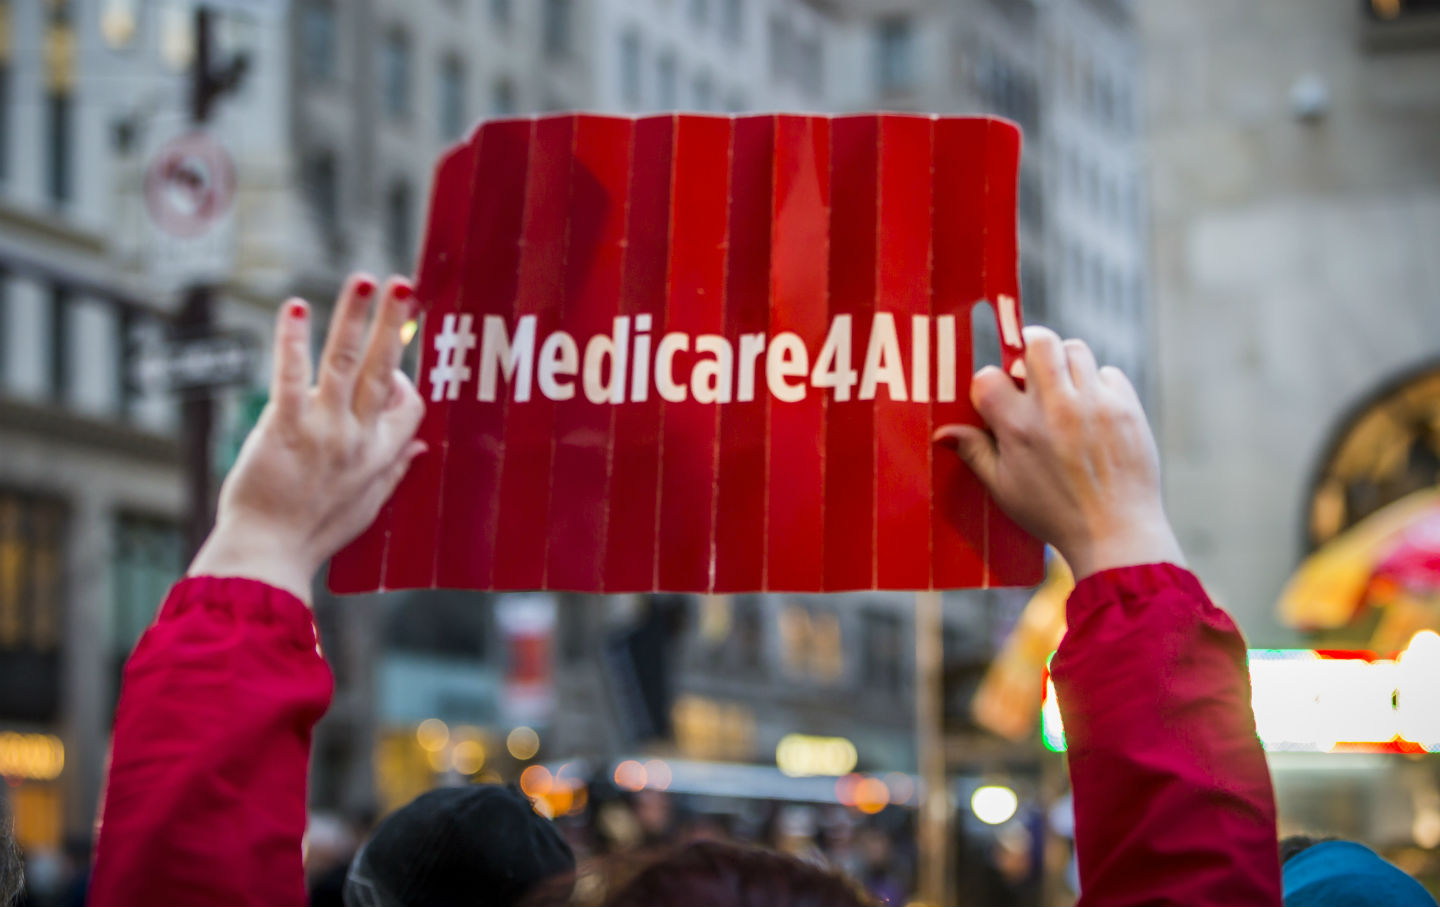 Medicare for all at Trump Tower